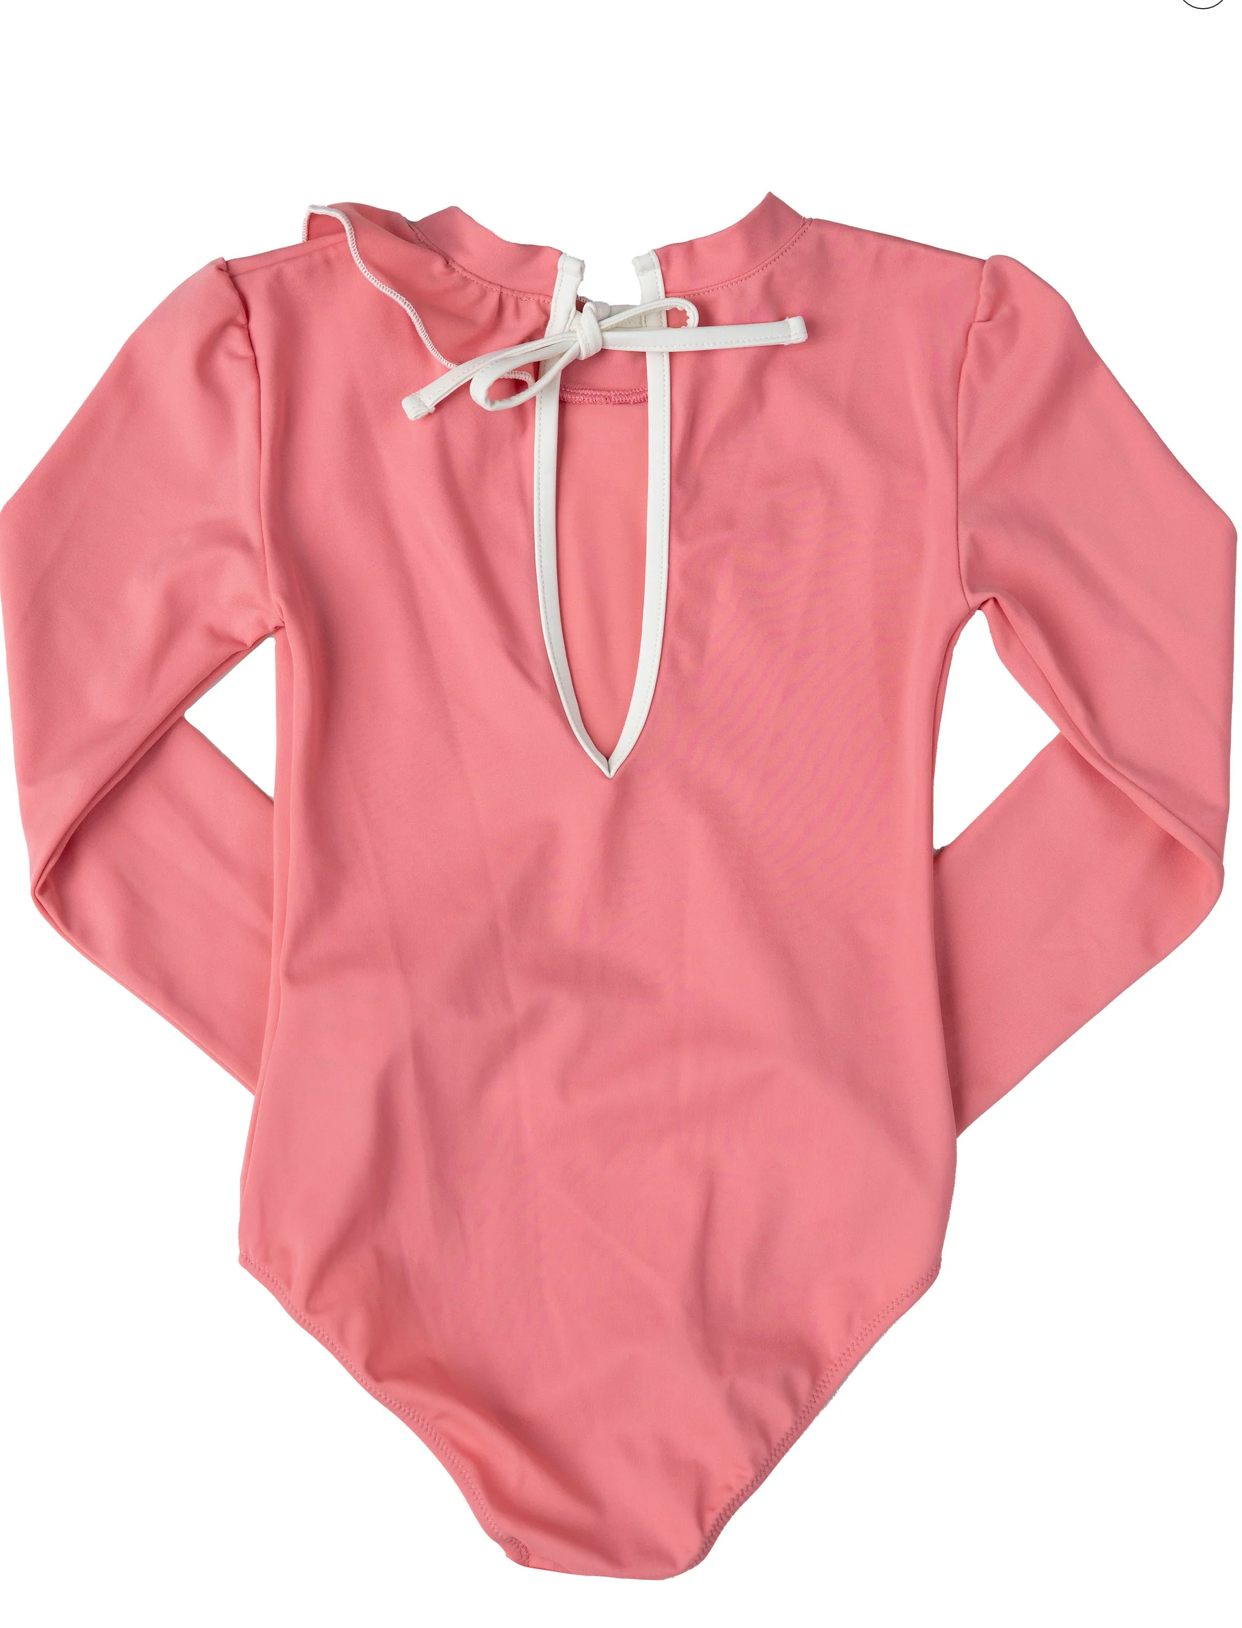 Folpetto Daphne Surf Suit in Blush Pink